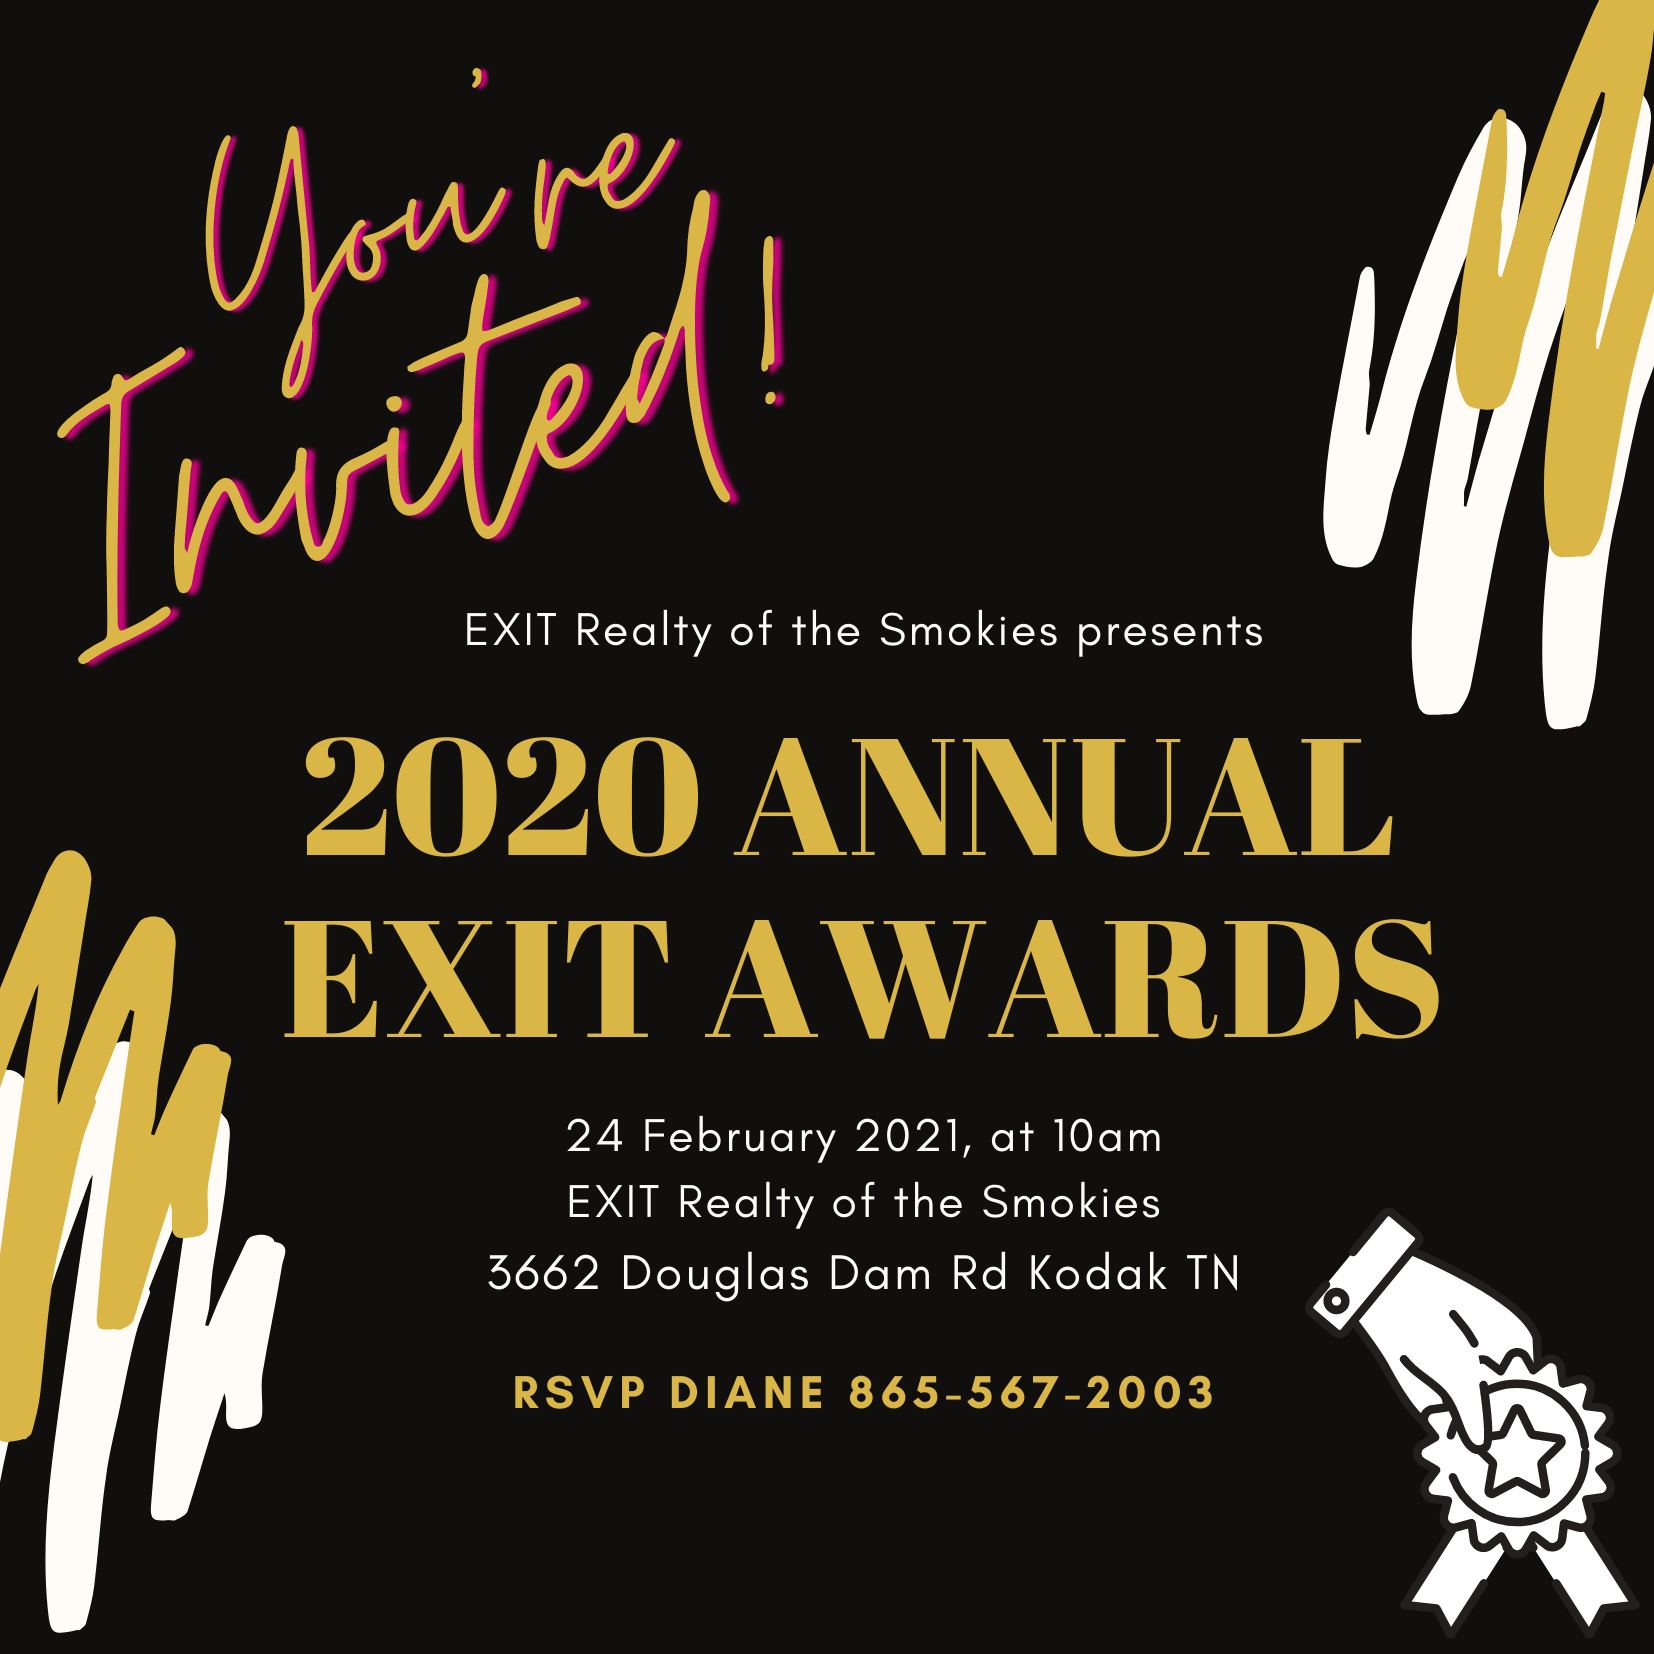 2020 EXIT AWARDS